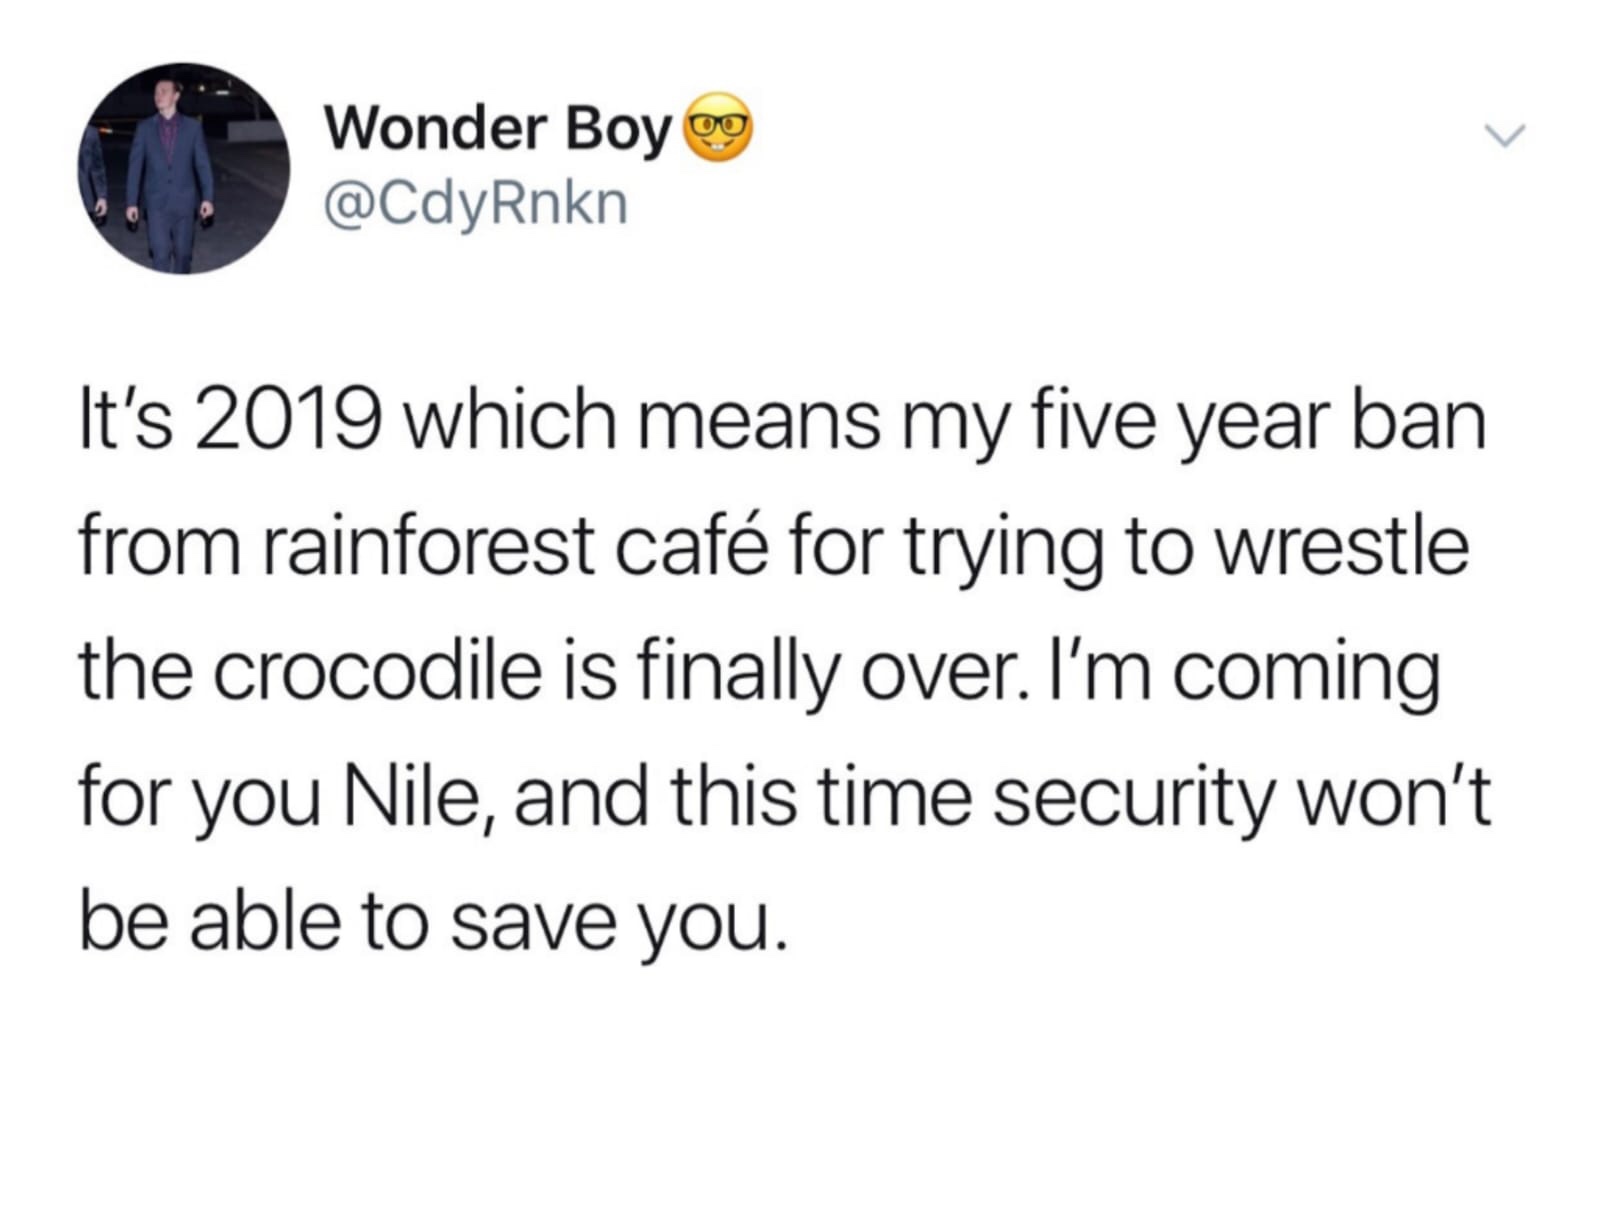 people don t check up on me - Wonder Boy It's 2019 which means my five year ban from rainforest caf for trying to wrestle the crocodile is finally over. I'm coming for you Nile, and this time security won't be able to save you.